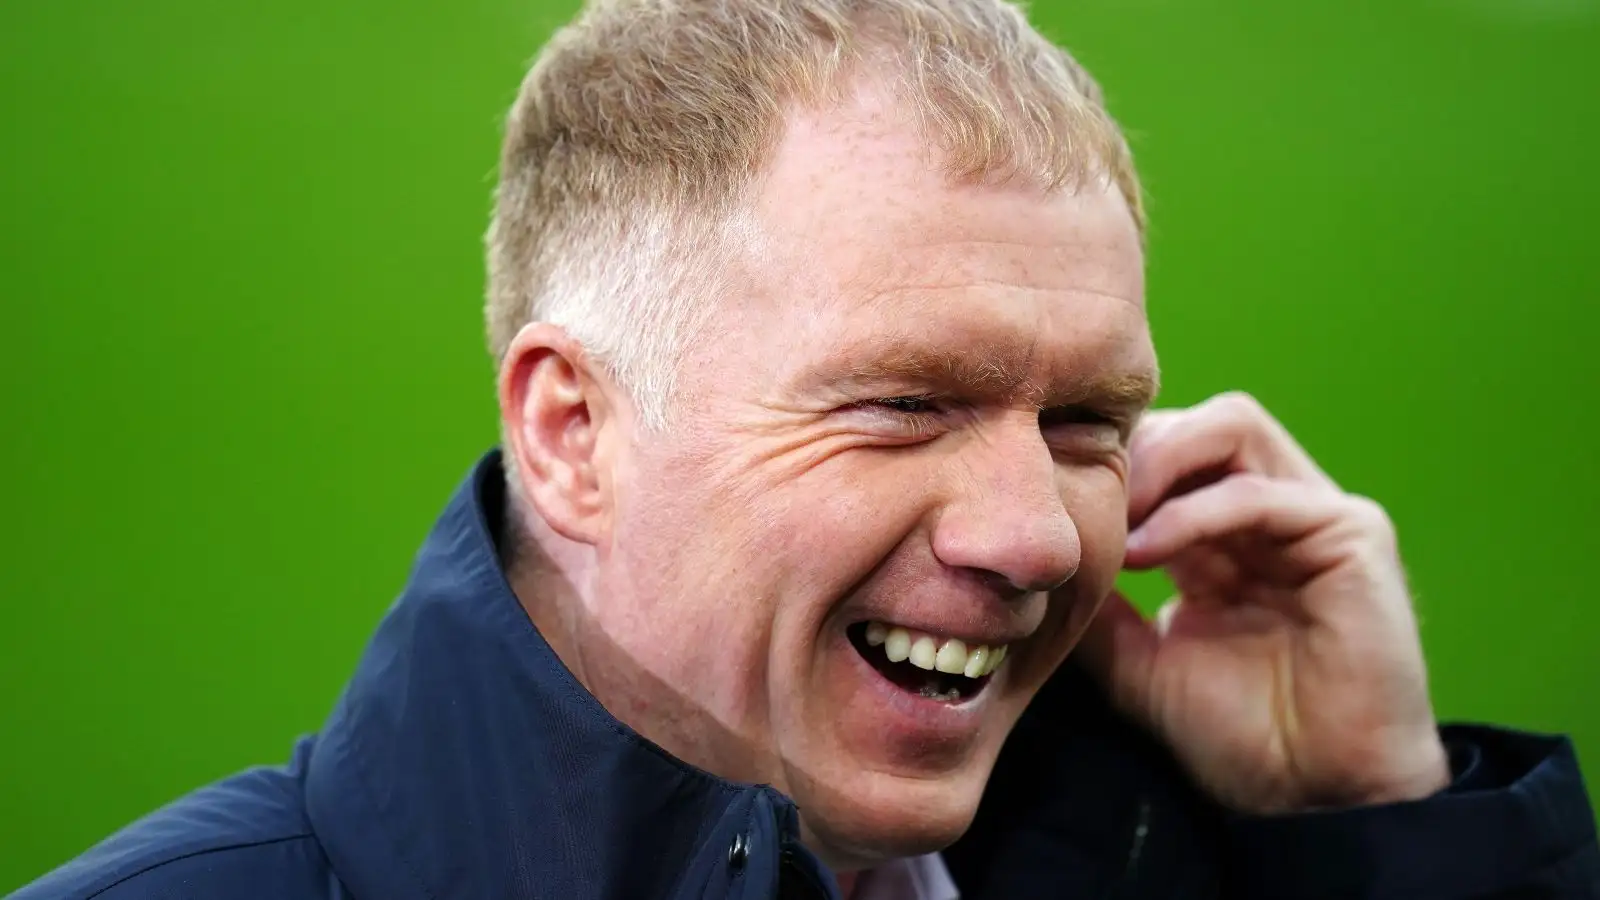 ‘He seems to have fallen out with him’ – Scholes hits out at Klopp over treatment of Liverpool star